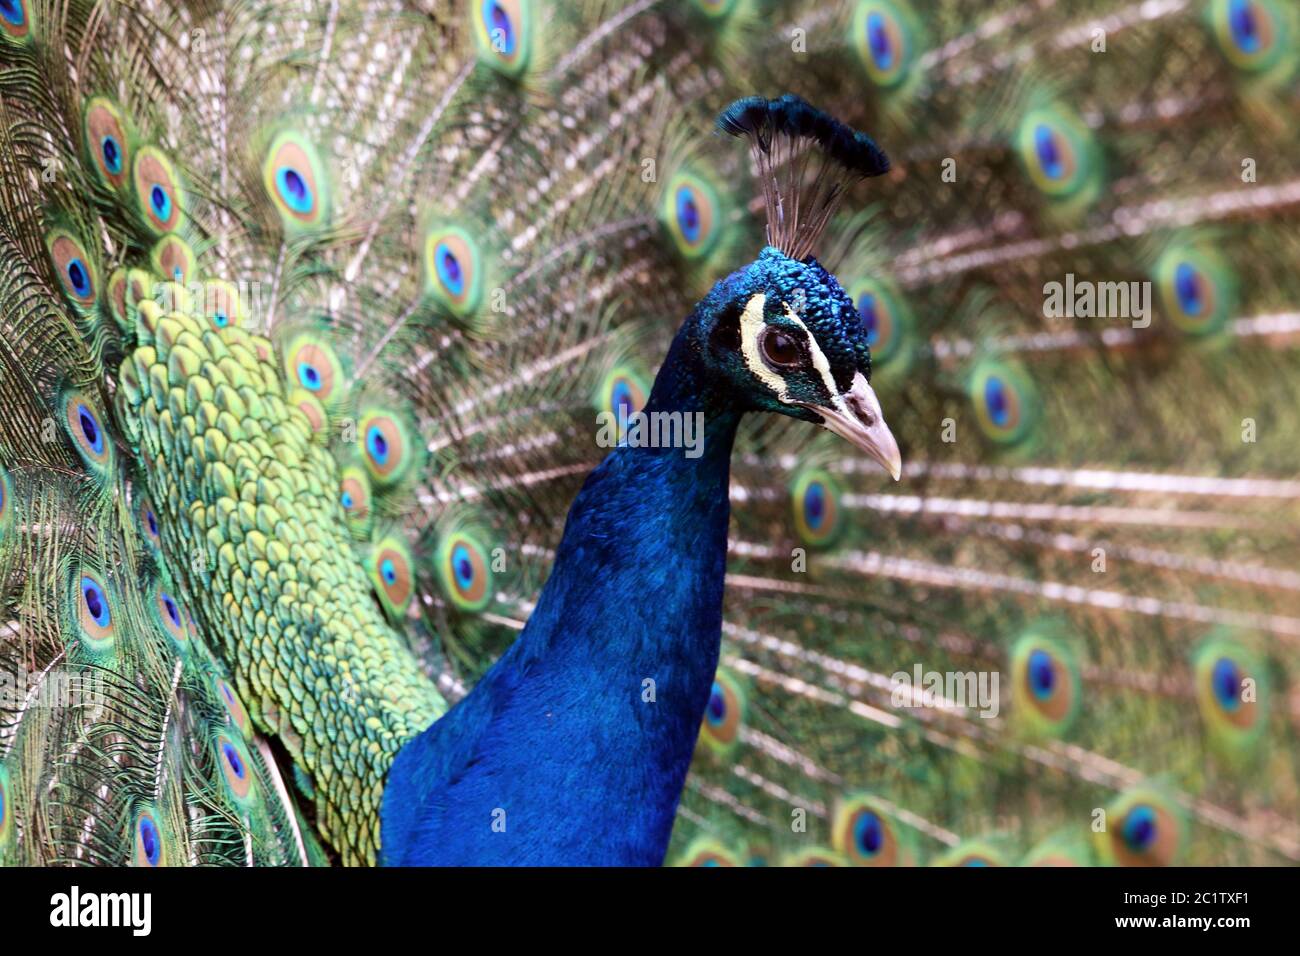 Blue Peacock Pavo cristatus with Jewelry Feathers Stock Photo